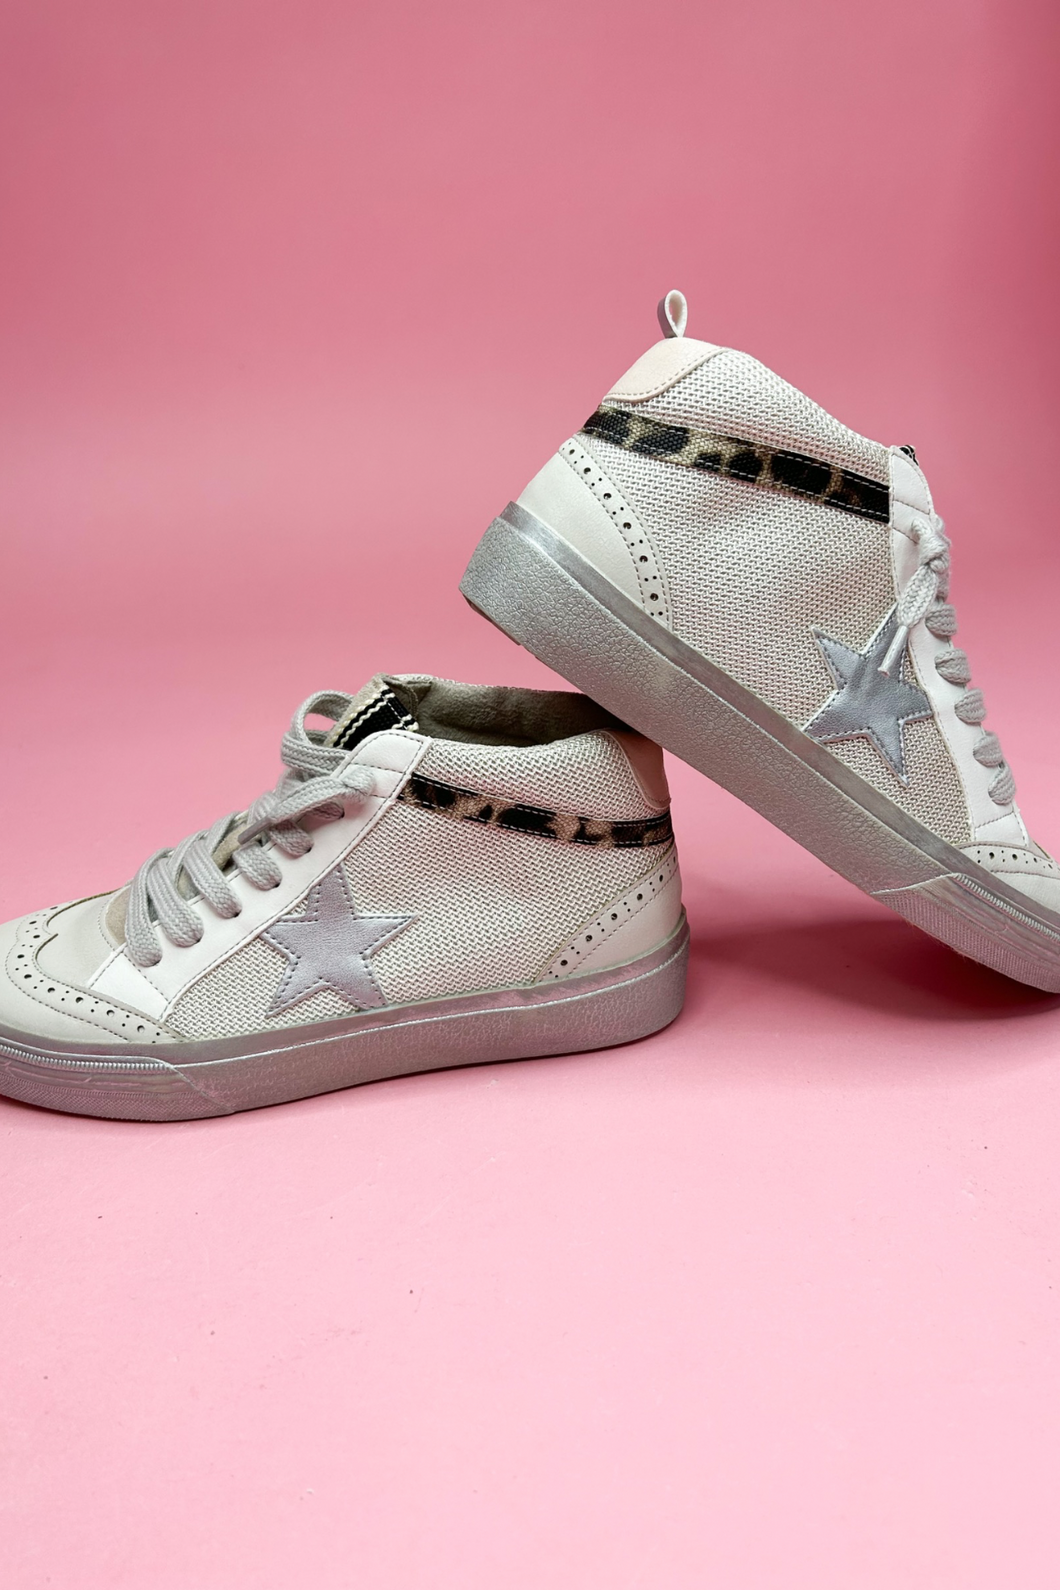 High Hopes High Top Sneakers by ShuShop